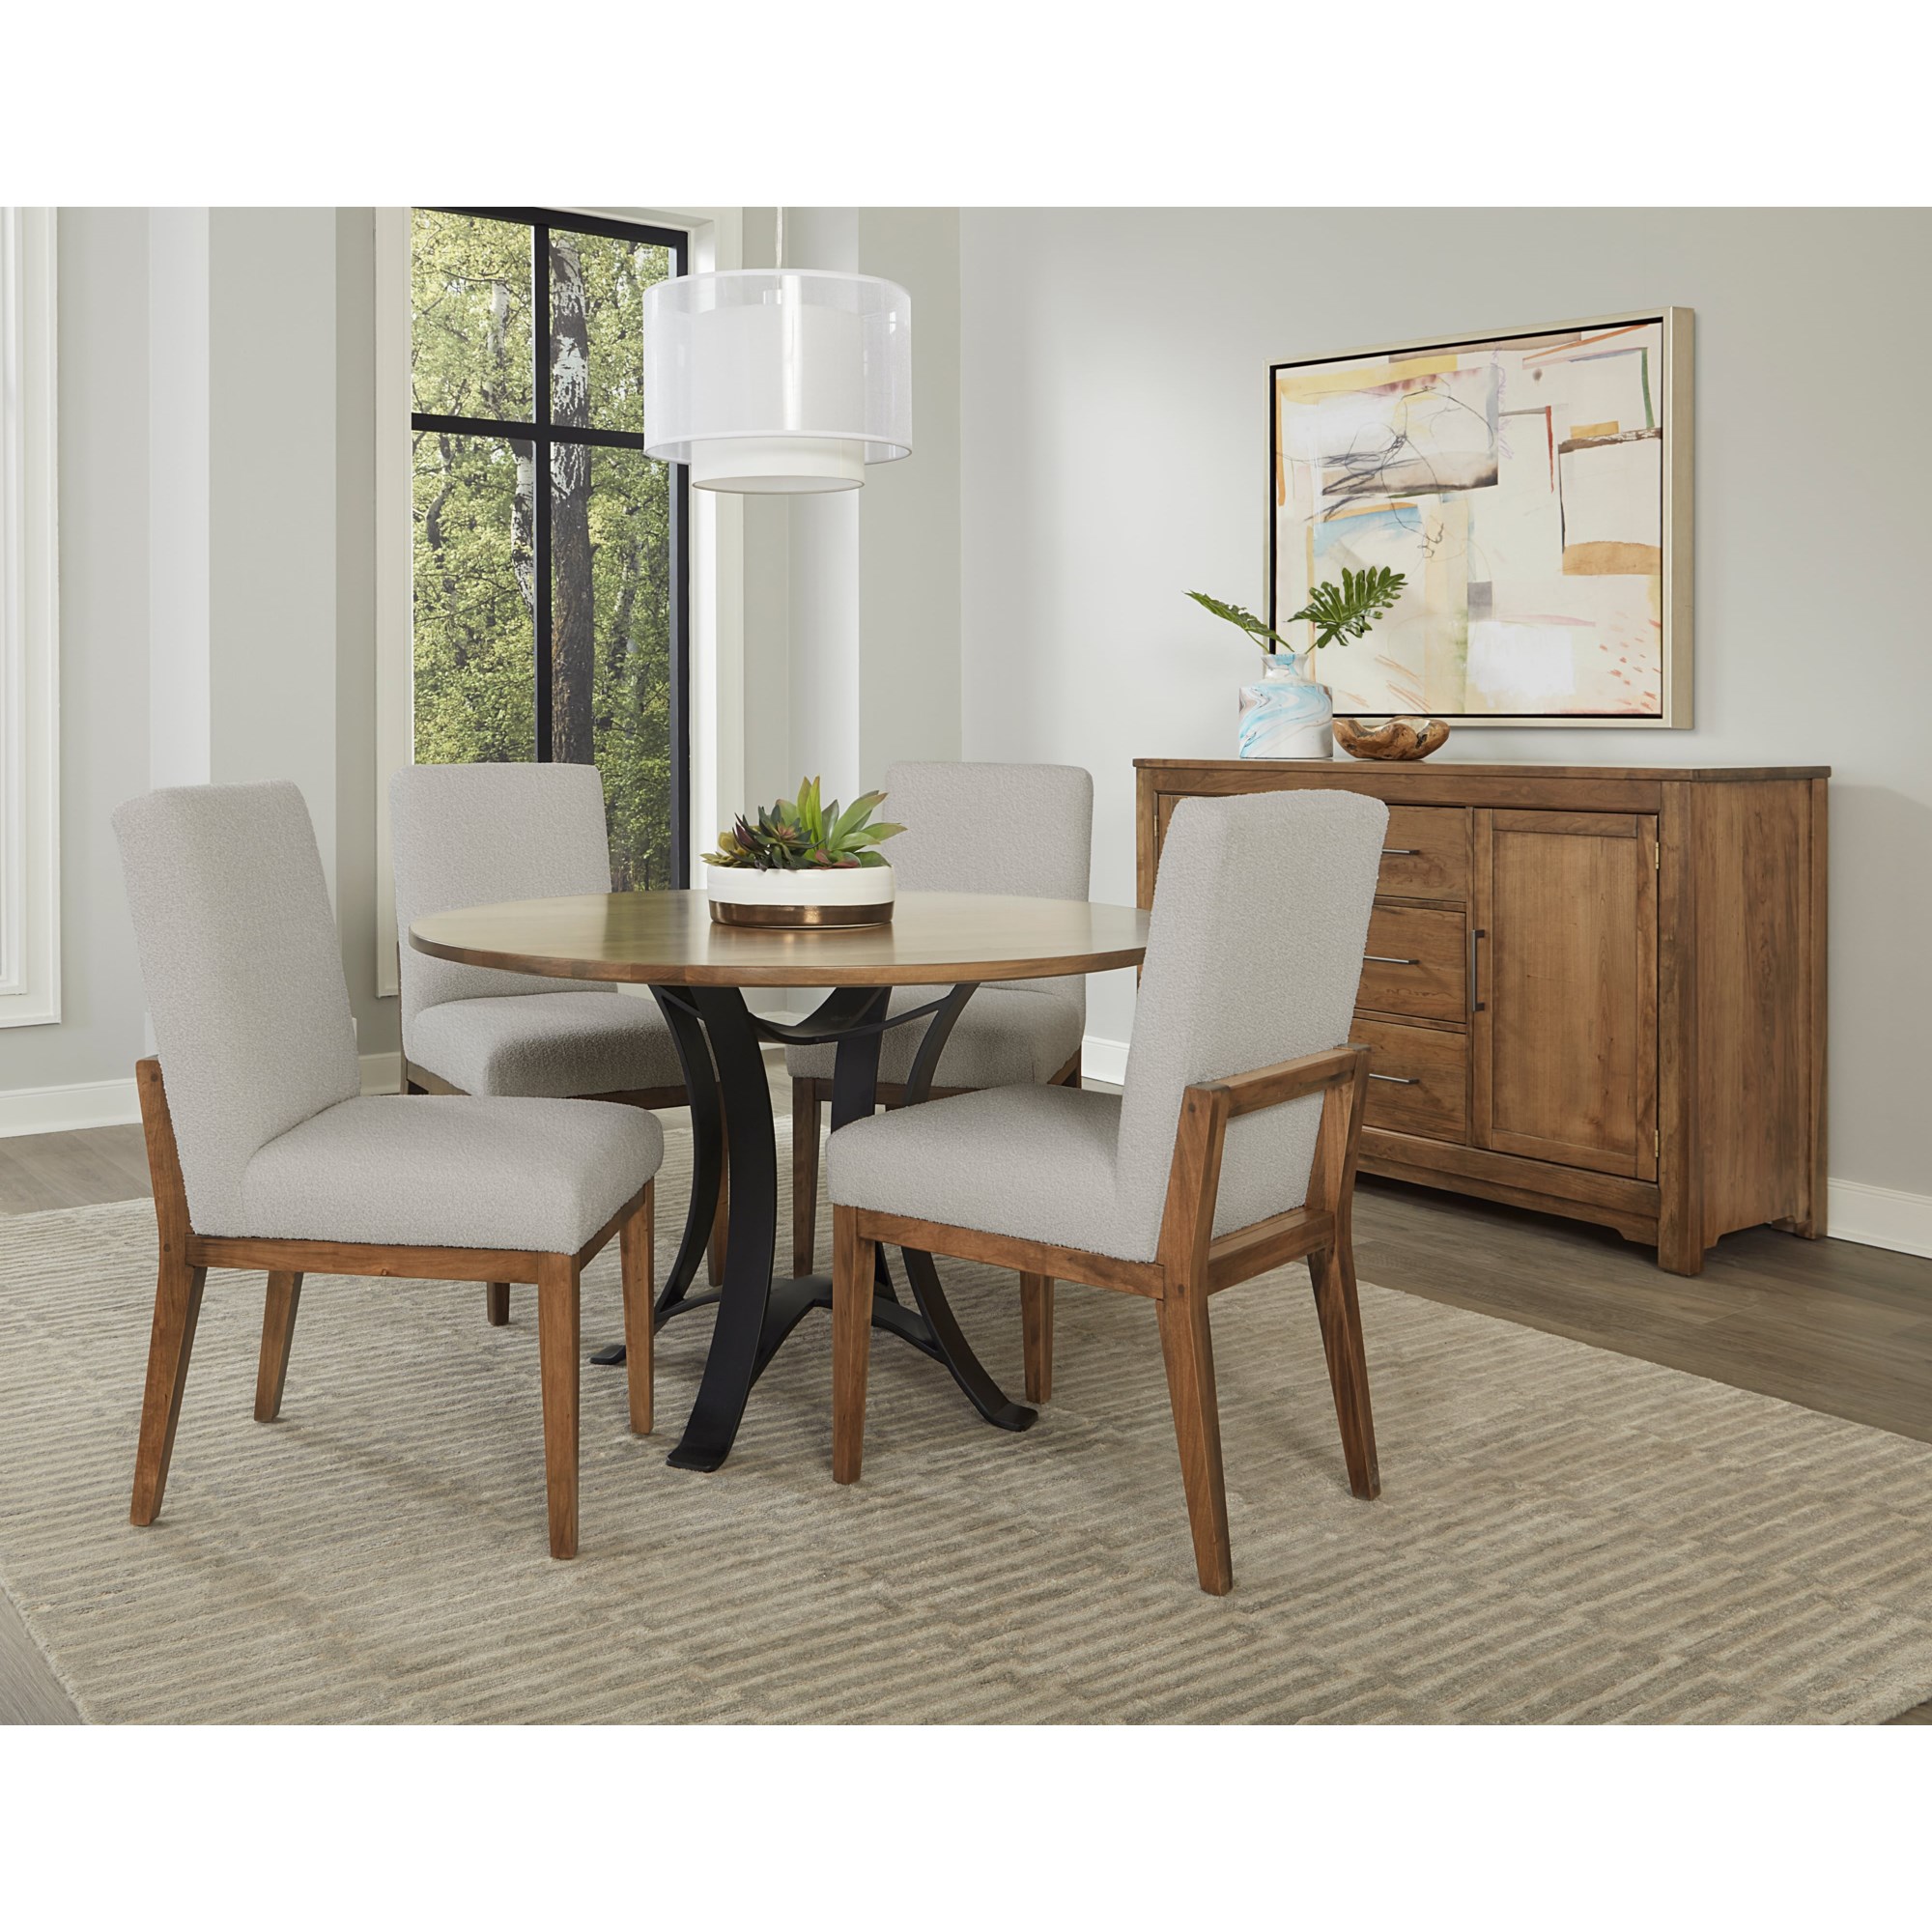 Upholstered Furniture Side - Side Squirrel Vaughan Medium 151-030B Brown Chair | Bassett Chair Cherry Crafted Chairs - Contemporary Dining | Dining